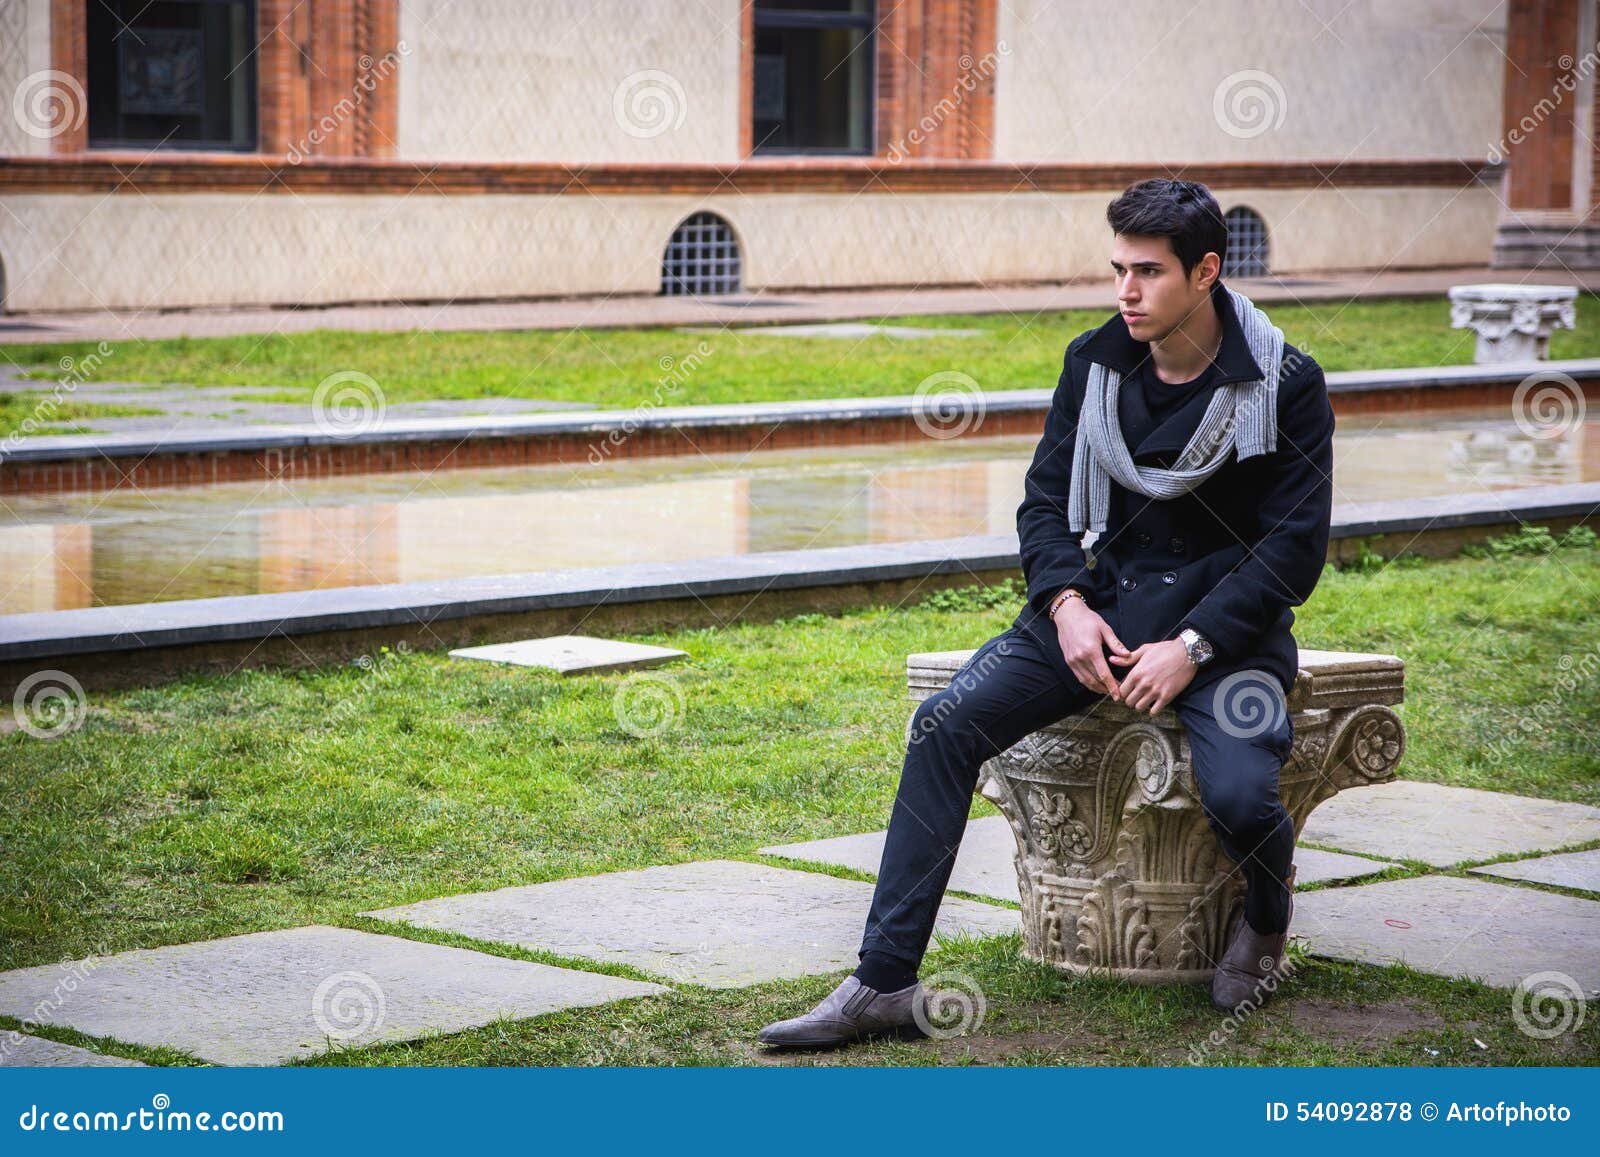 Young Man Outside the Building Looking Away to. Handsome Young Man Outside Ancient Castle or Building Looking Away to Left, Sitting on Stone